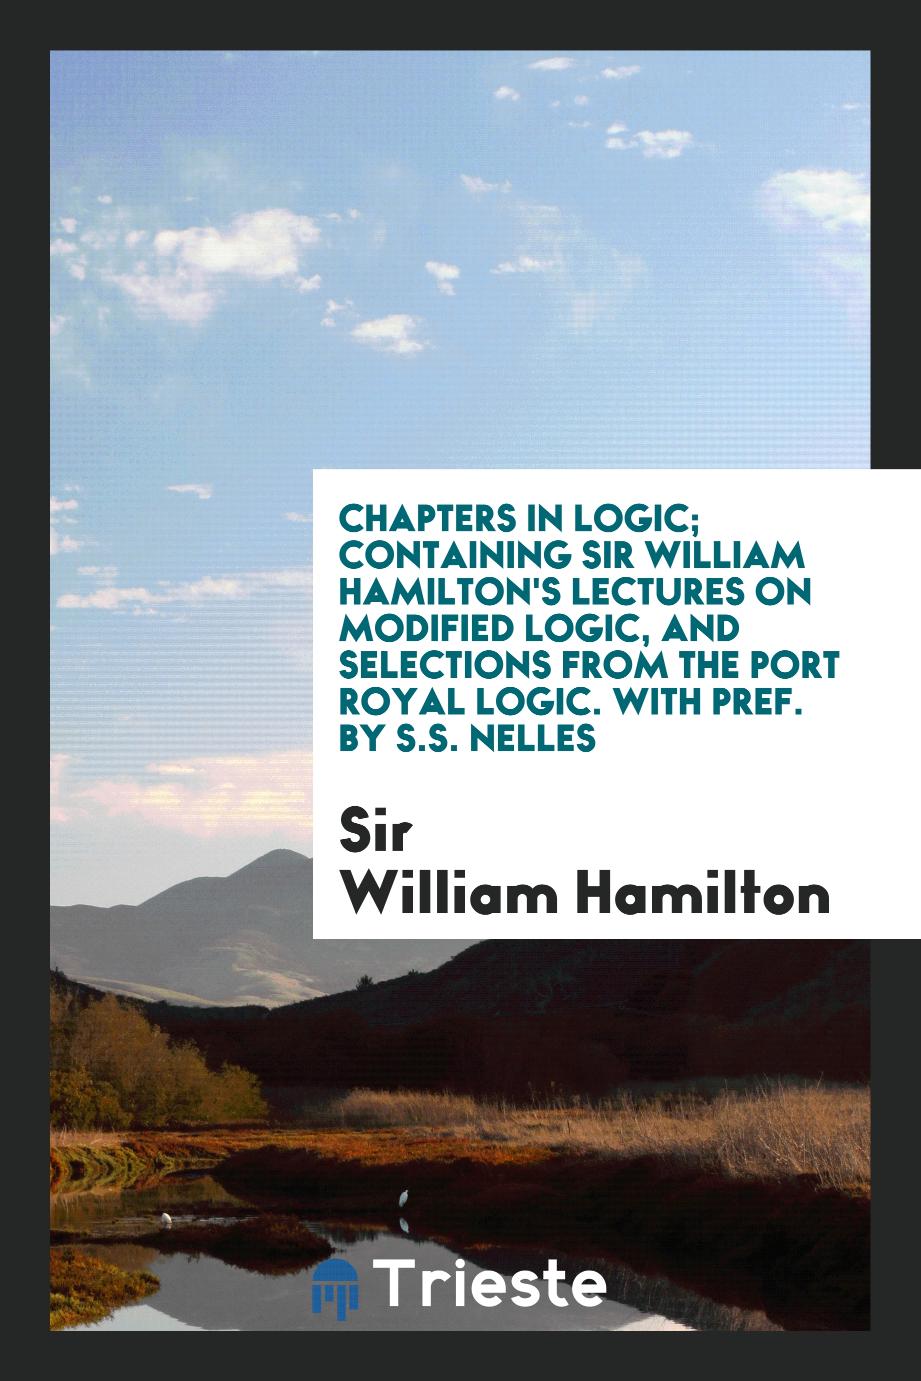 Chapters in logic; containing Sir William Hamilton's Lectures on modified logic, and selections from the Port Royal logic. With pref. by S.S. Nelles